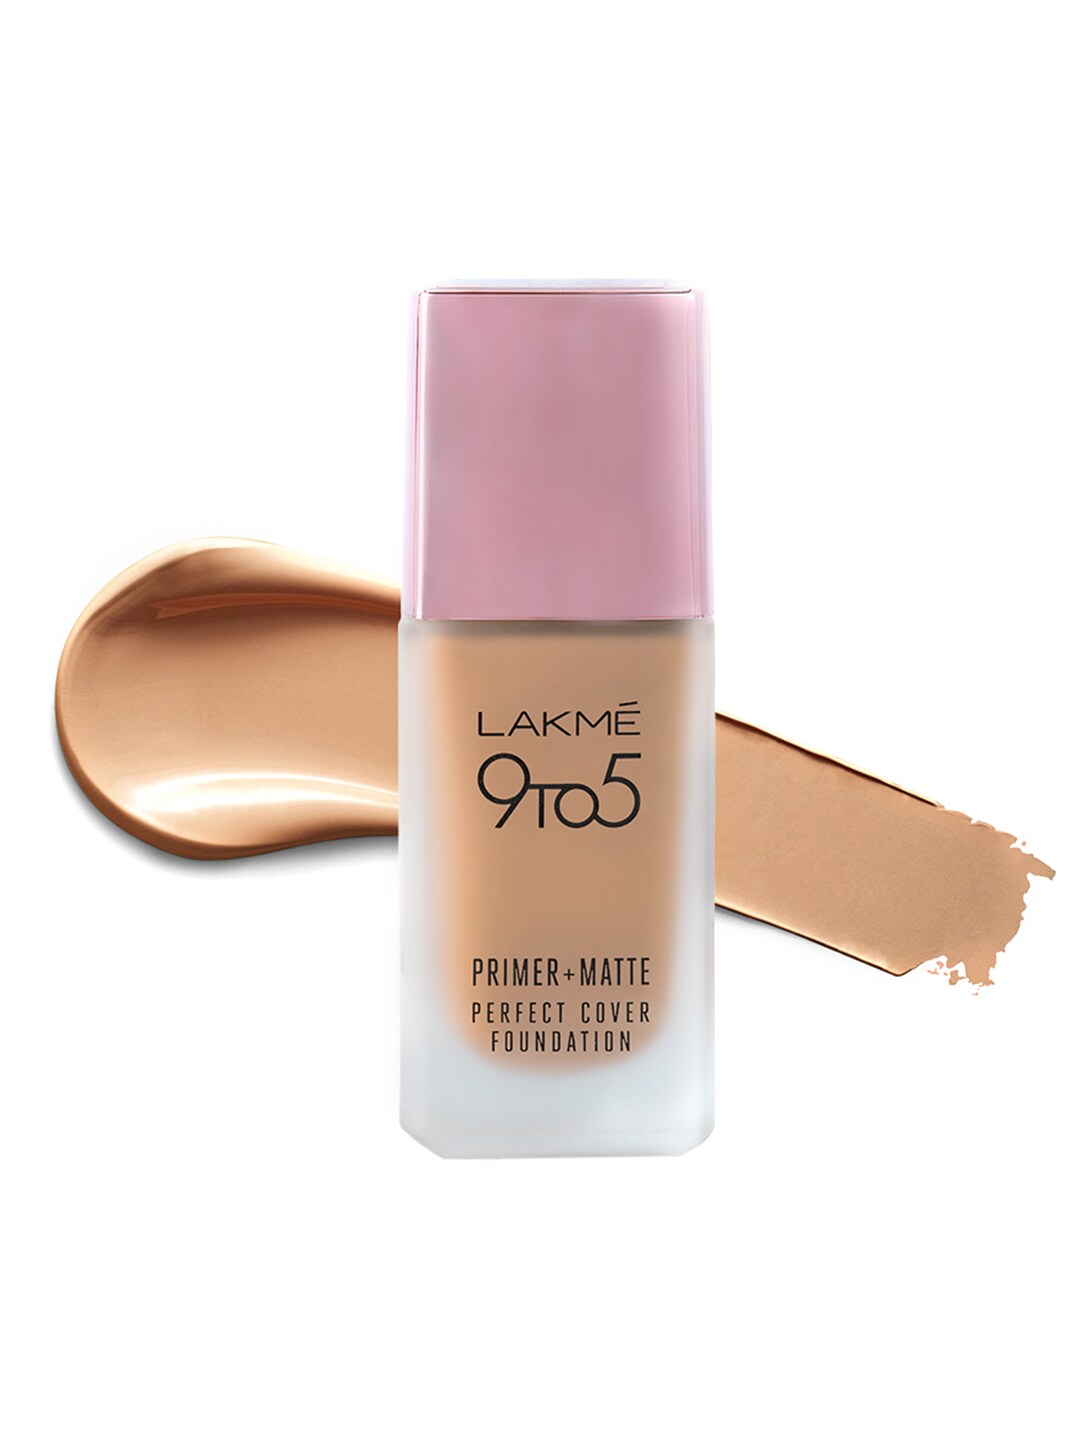 Lakme 9To5 Primer & Matte Perfect Cover Foundation - Neutral Medium N220 25 ml Price in India